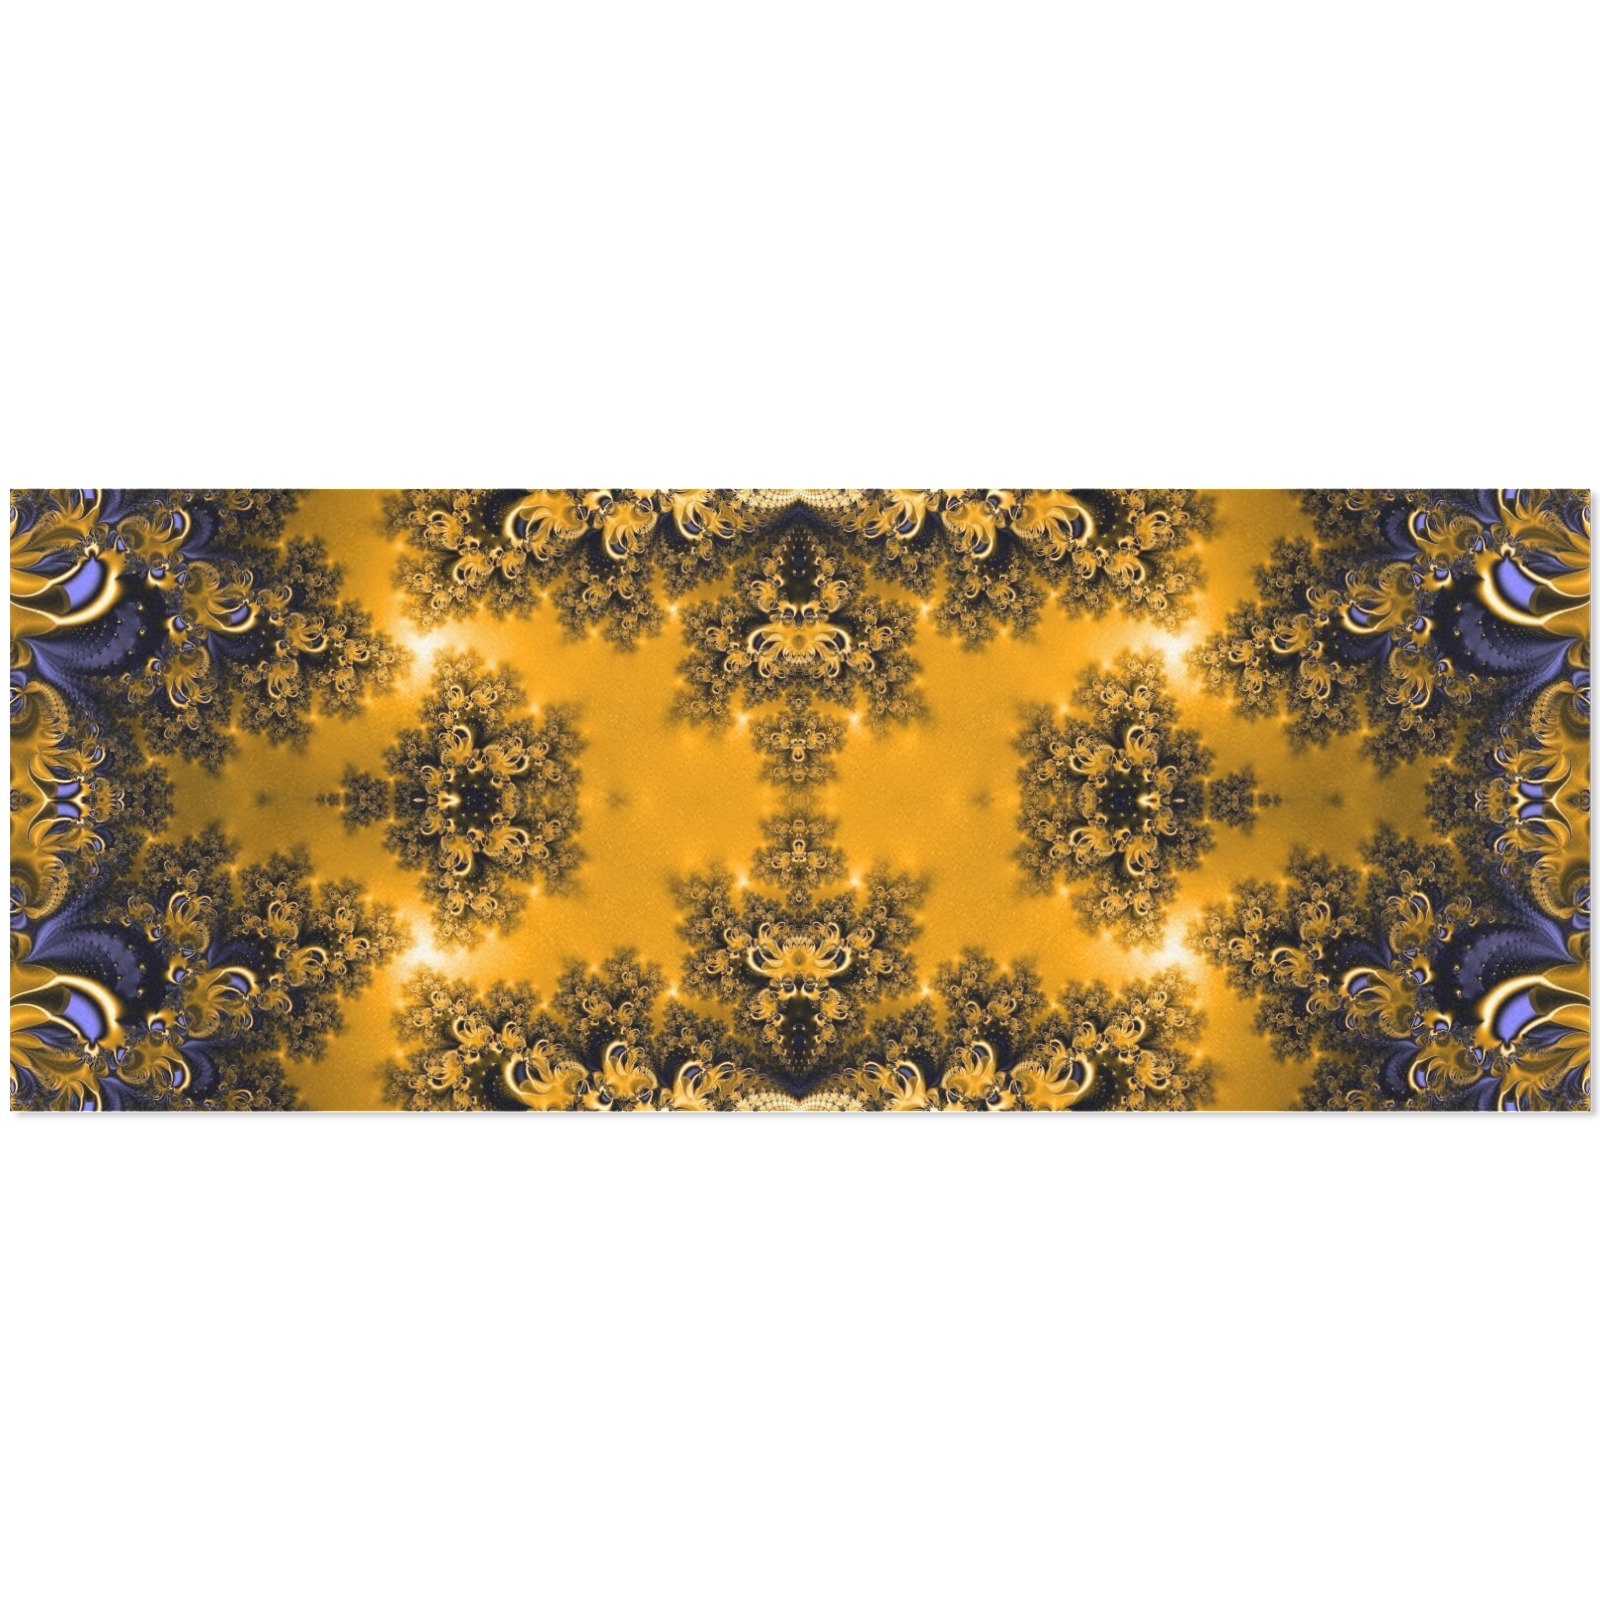 Golden Sun through the Trees Frost Fractal Gift Wrapping Paper 58"x 23" (2 Rolls)